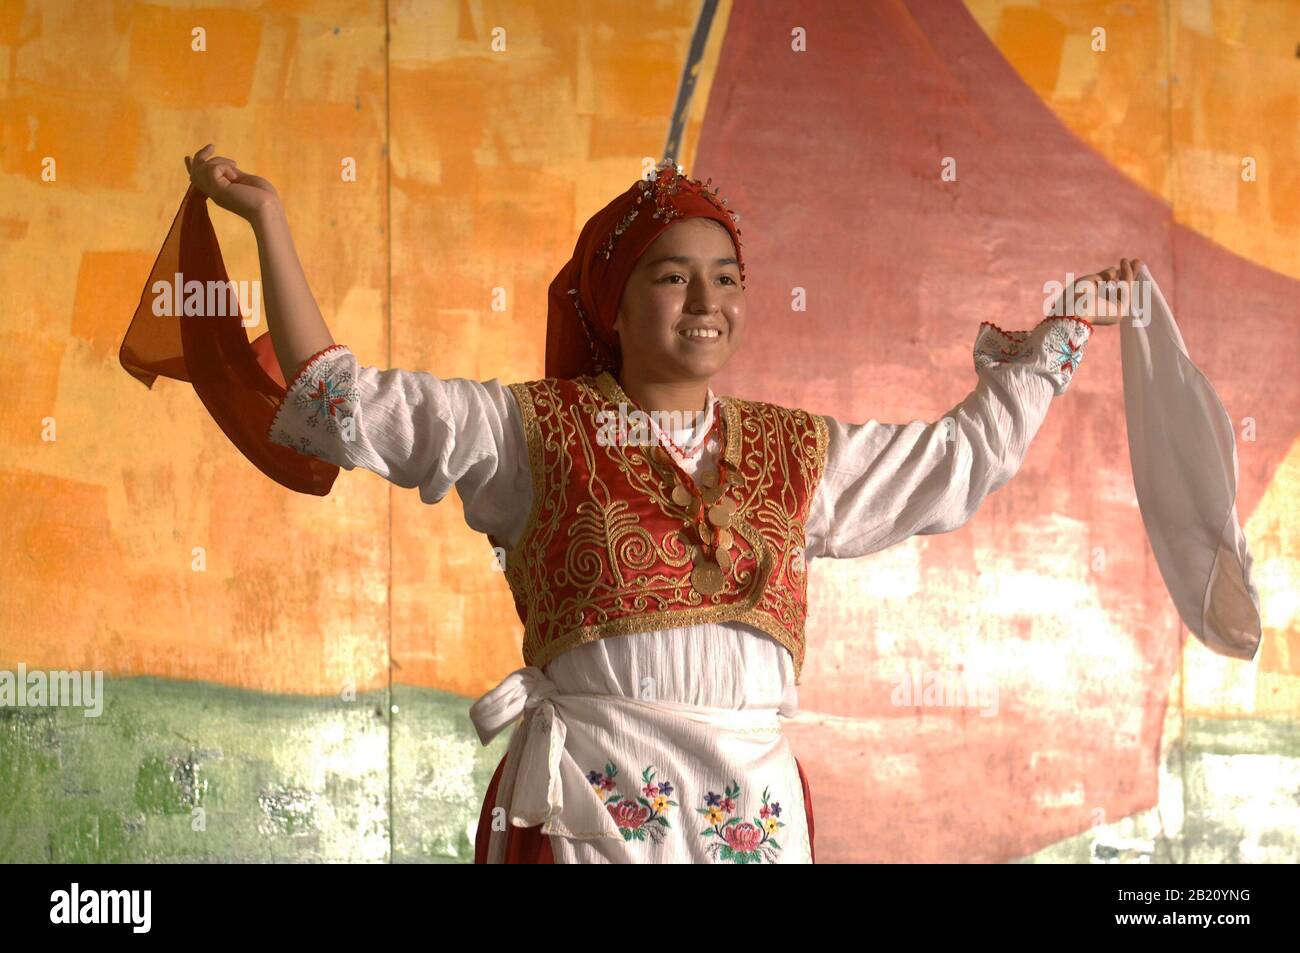 Austin, Texas November 12, 2005: Turkish dancer performs at the End of Ramadan (Eid) Festival for the Muslim community of central Texas, which welcomes all faiths to a gathering showcasing food, dancing and festivities of the Muslim world. ©Bob Daemmrich Stock Photo